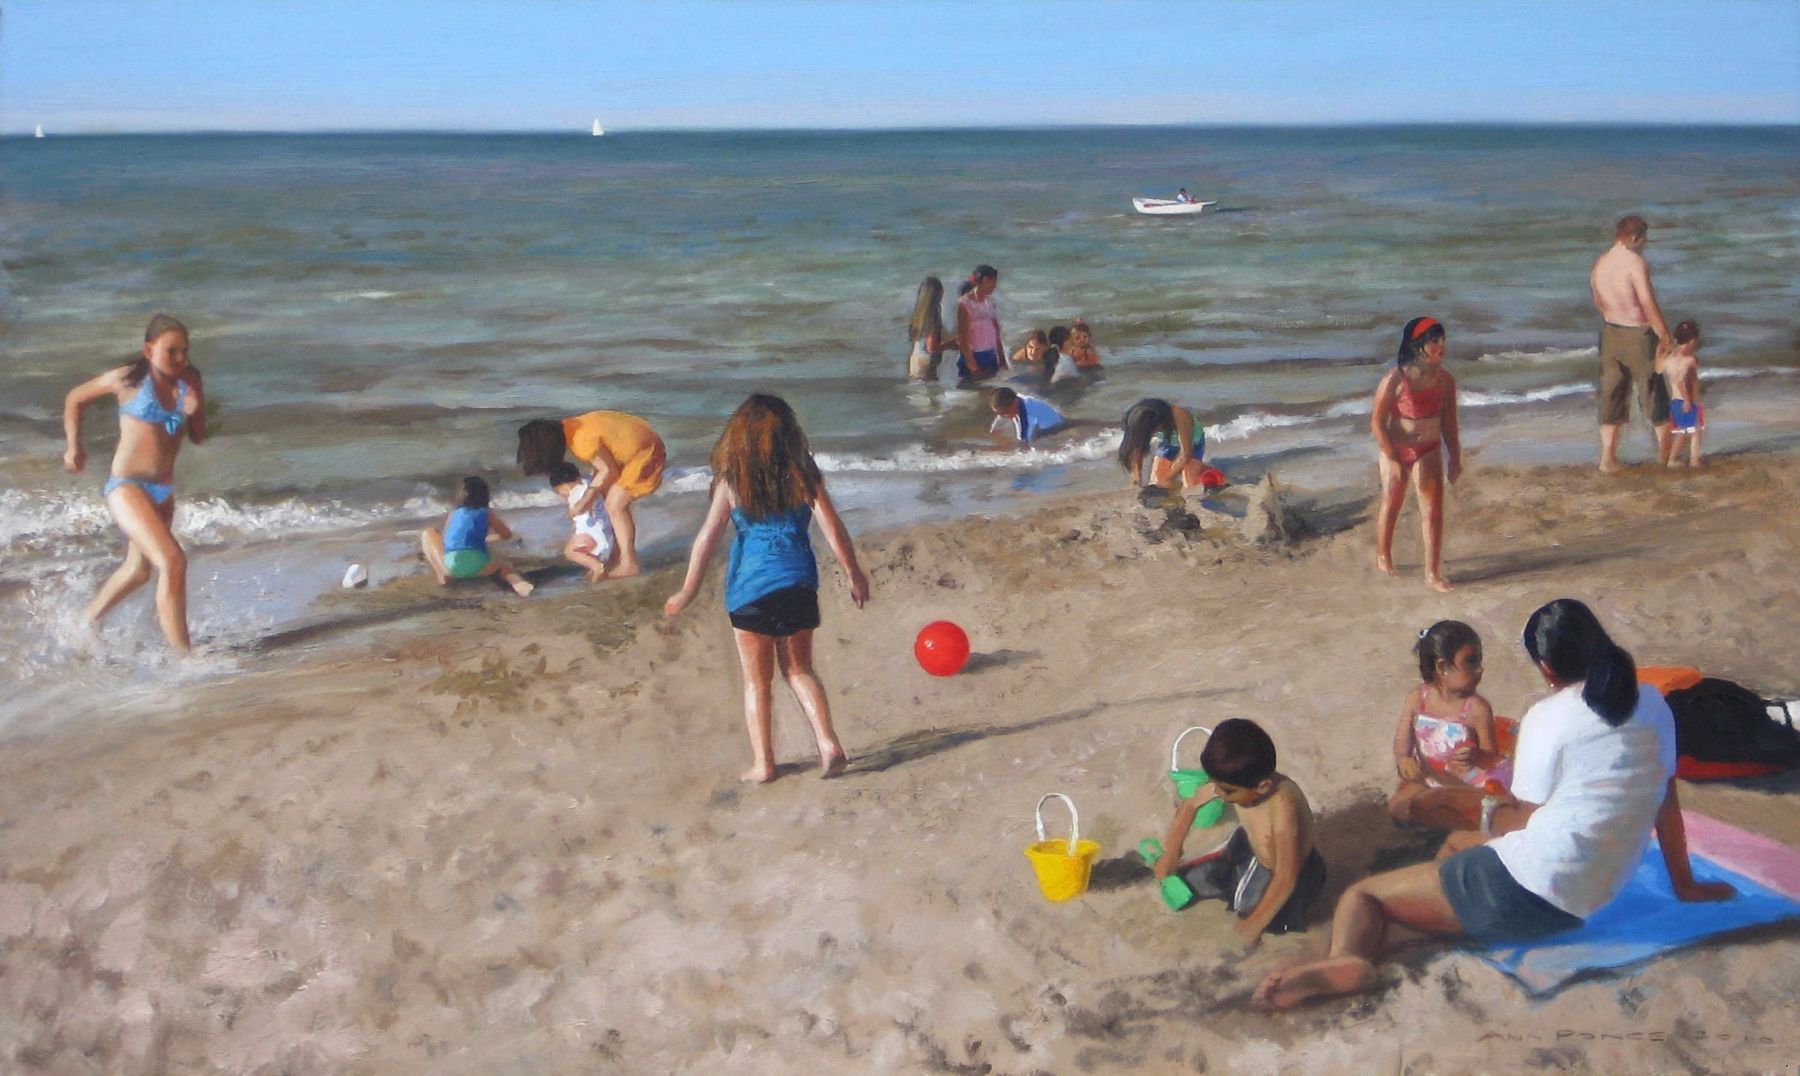 Figures on Montrose Beach 36" x 60" oil on canvas by Ann Ponce